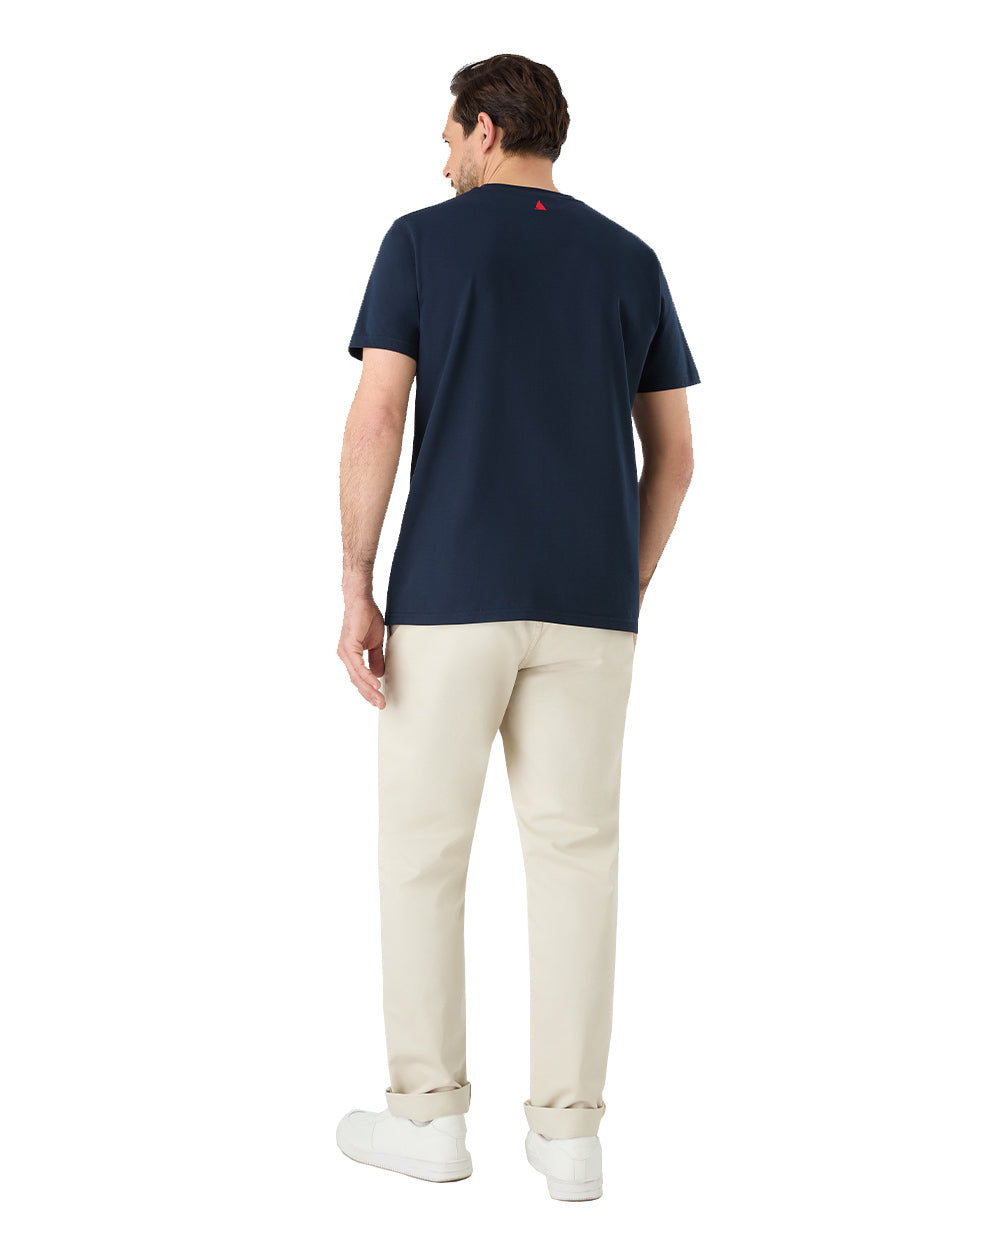 Navy Coloured Musto Mens Nautic Short Sleeve T-Shirt On A White Background 